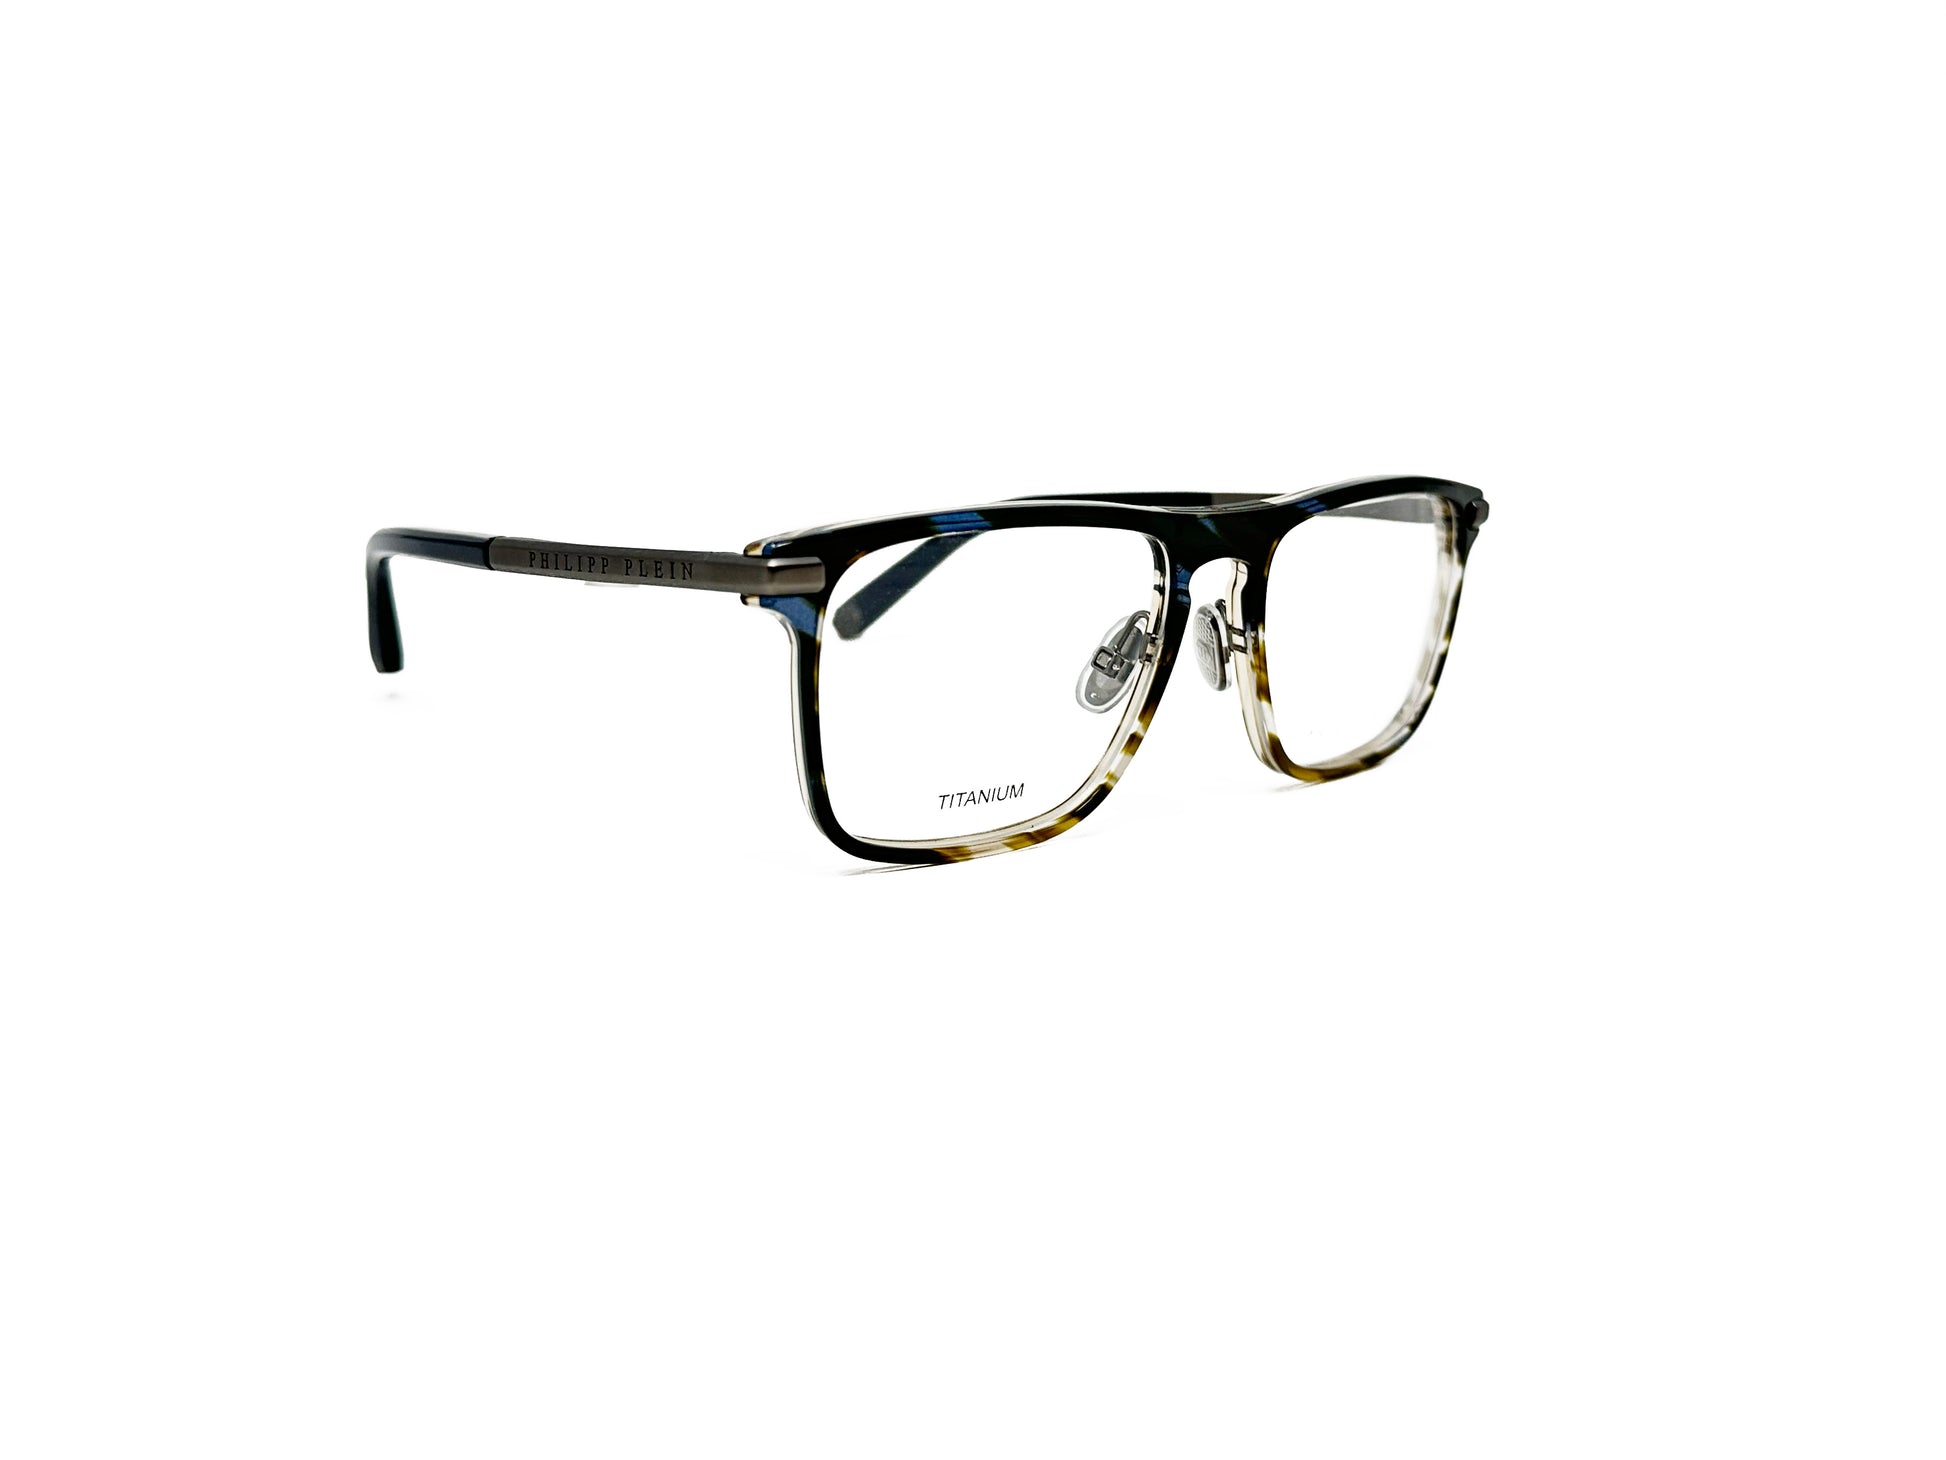 Philipp Plein rectangular acetate optical frame with keyhole bridge. Model: VPP019 First Love. Color: 09N3 Brown and blue. Side view.